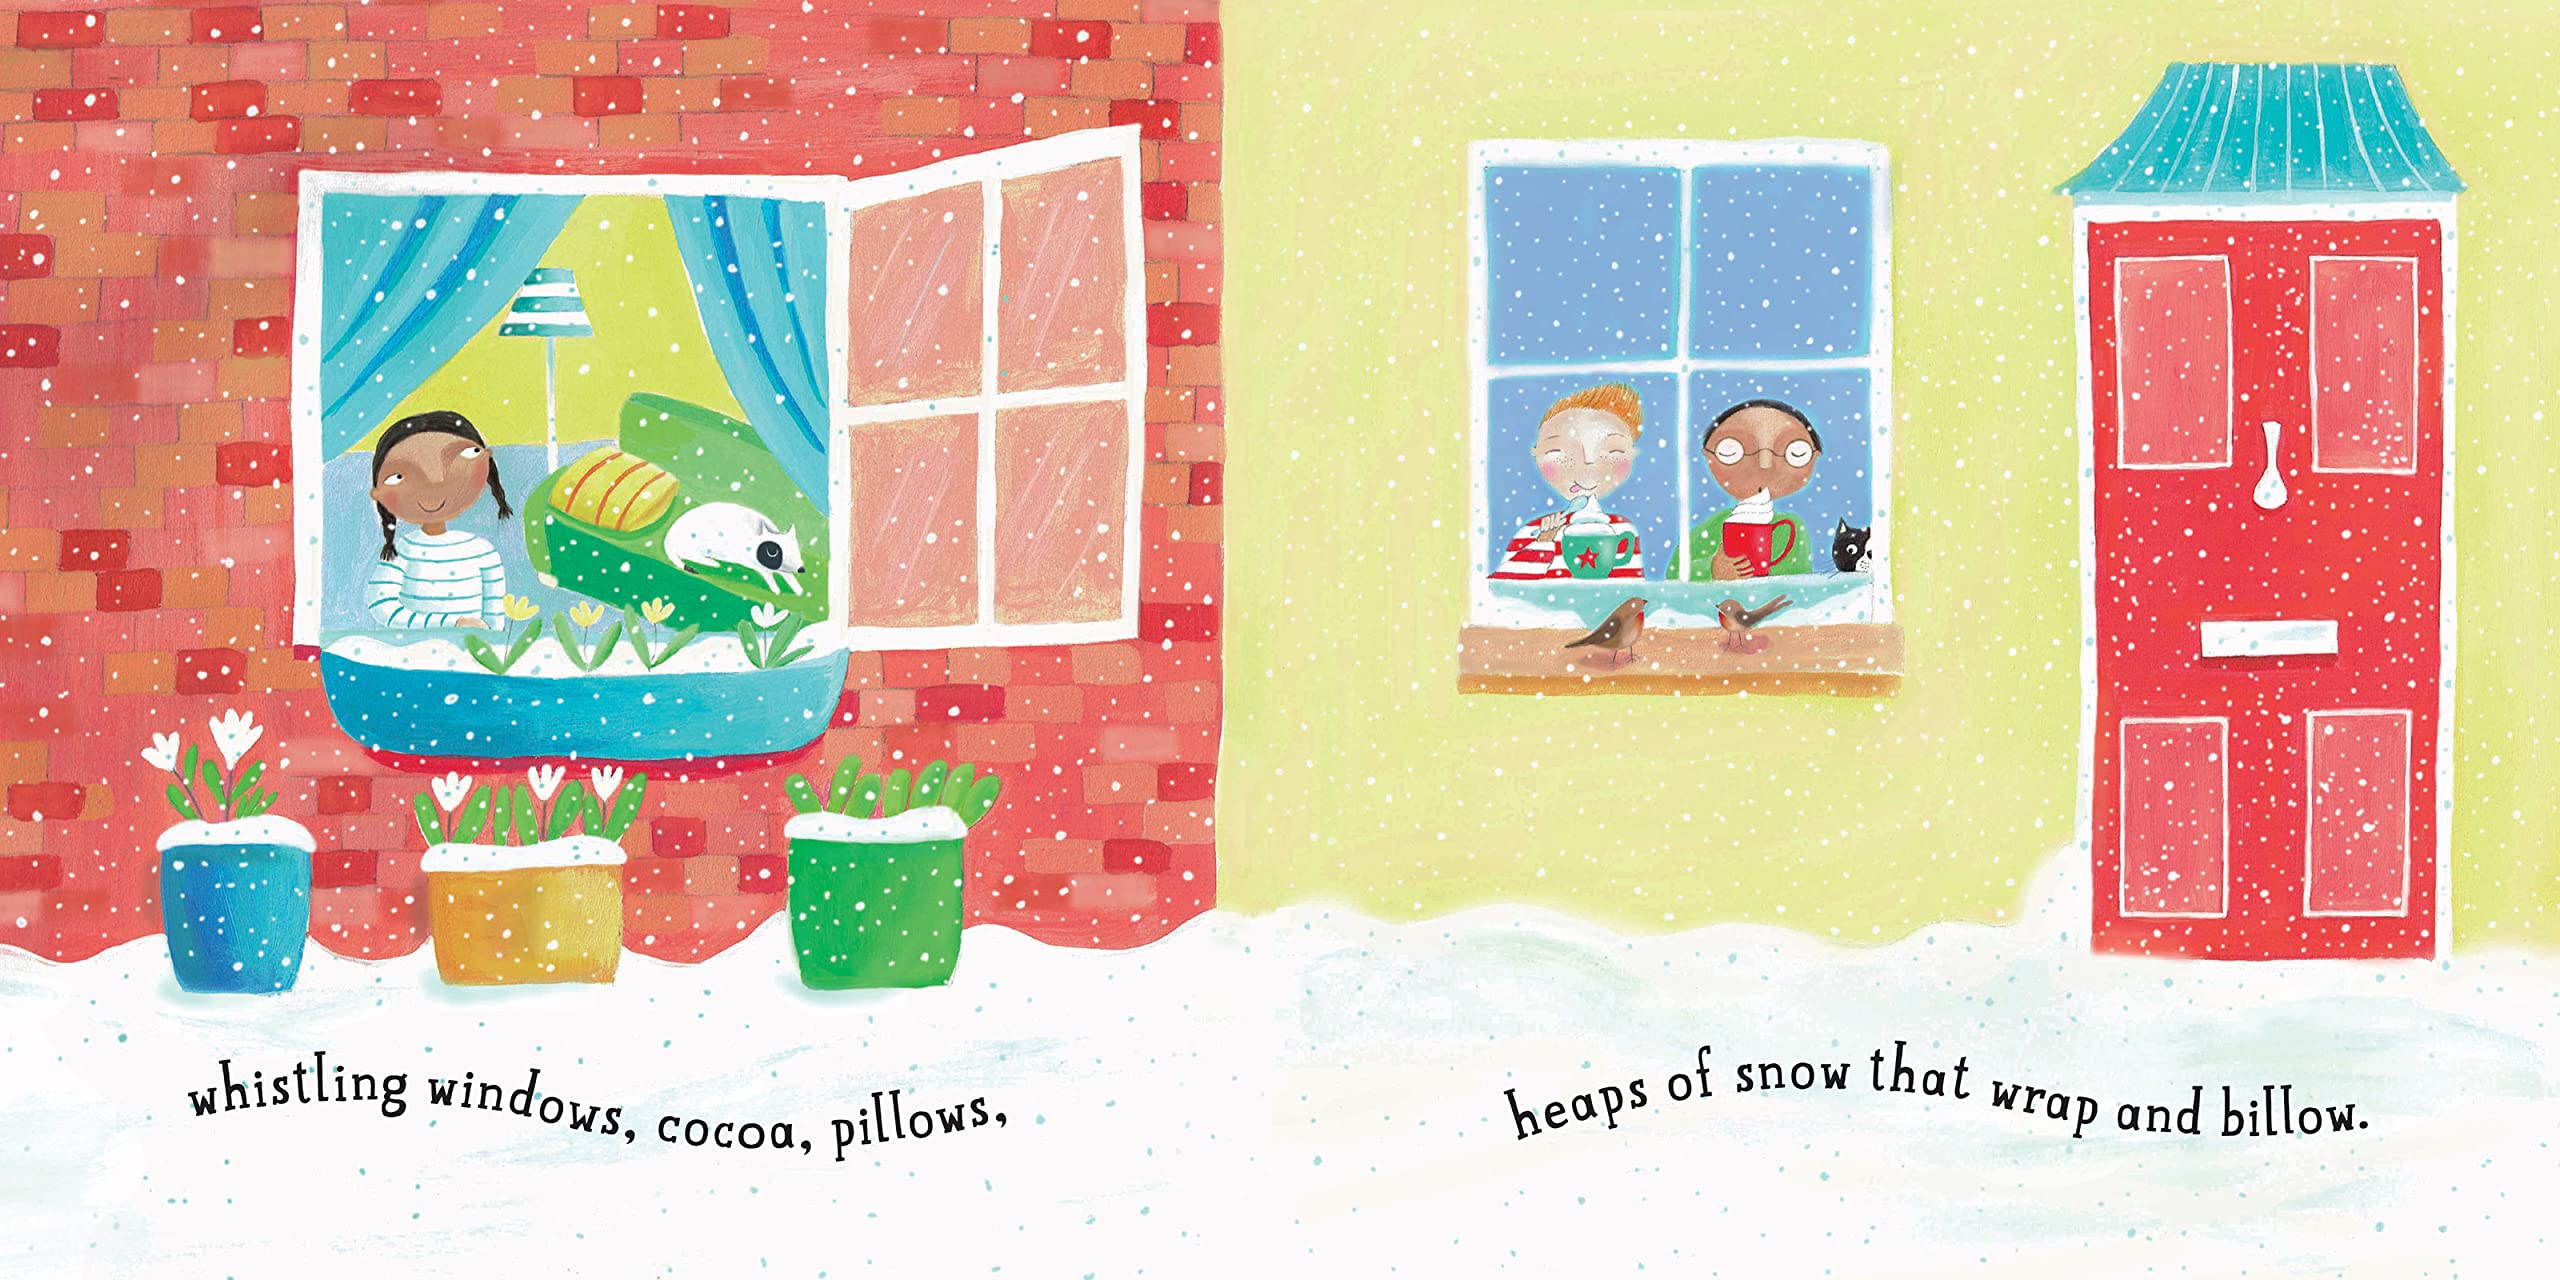 Illustration showing people inside a house looking out a window while snow falls